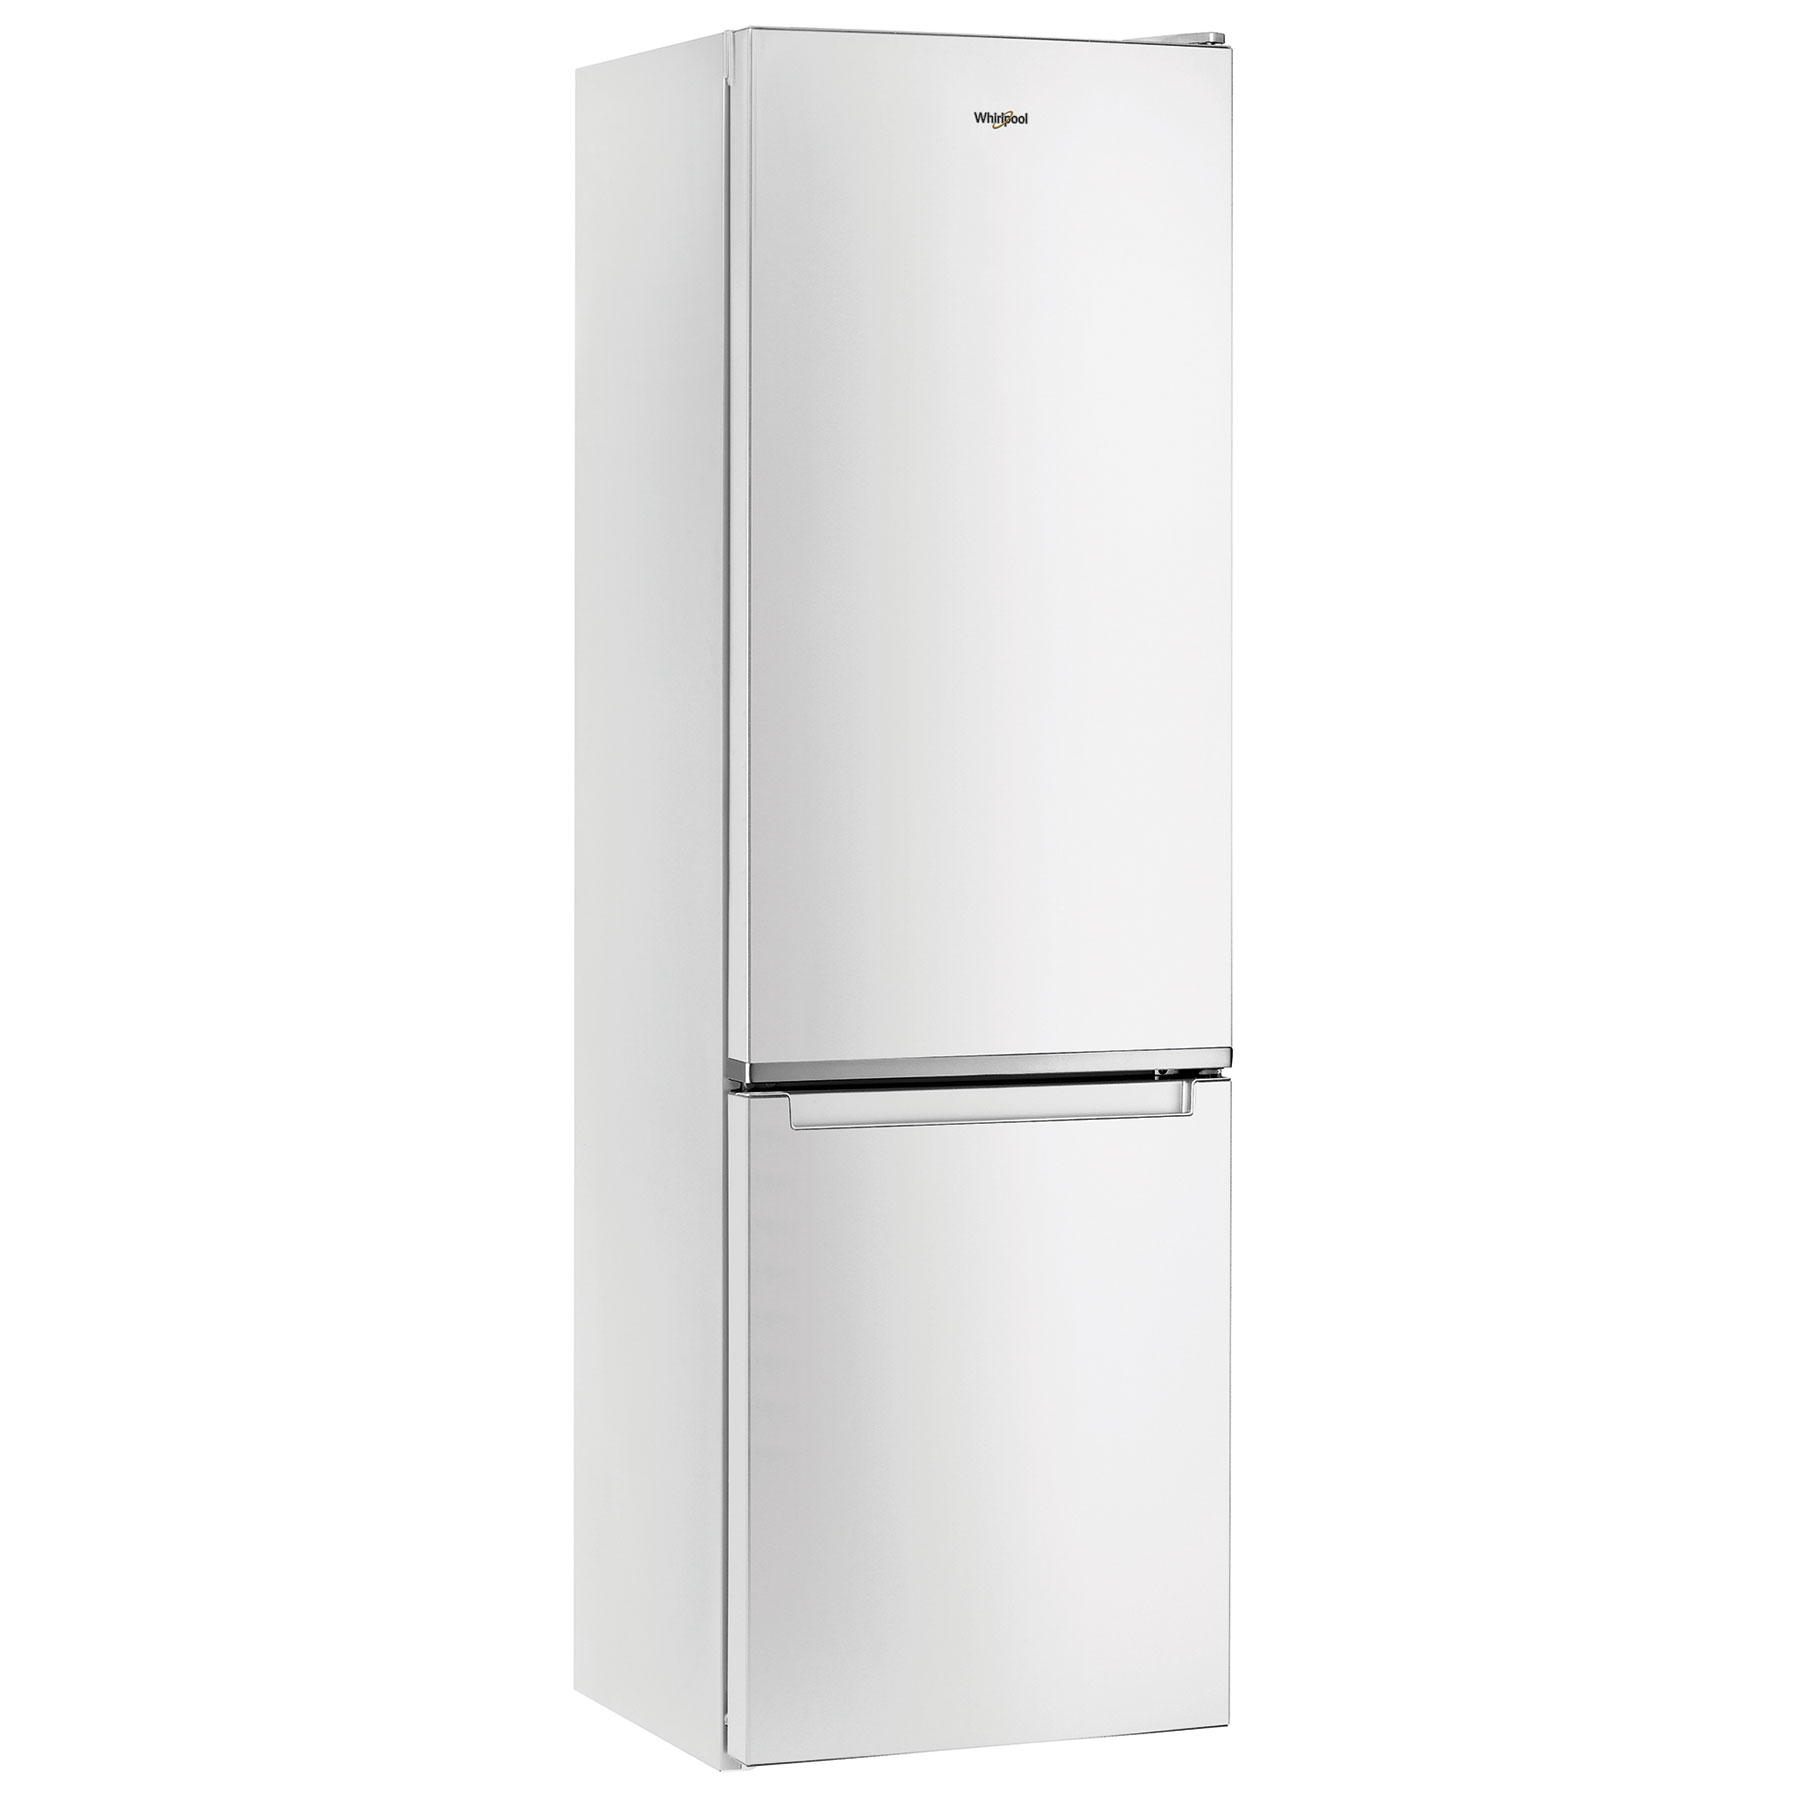 Hotpoint H9C941CW 60cm Frost Free Fridge Freezer in White 2 01m C Rate